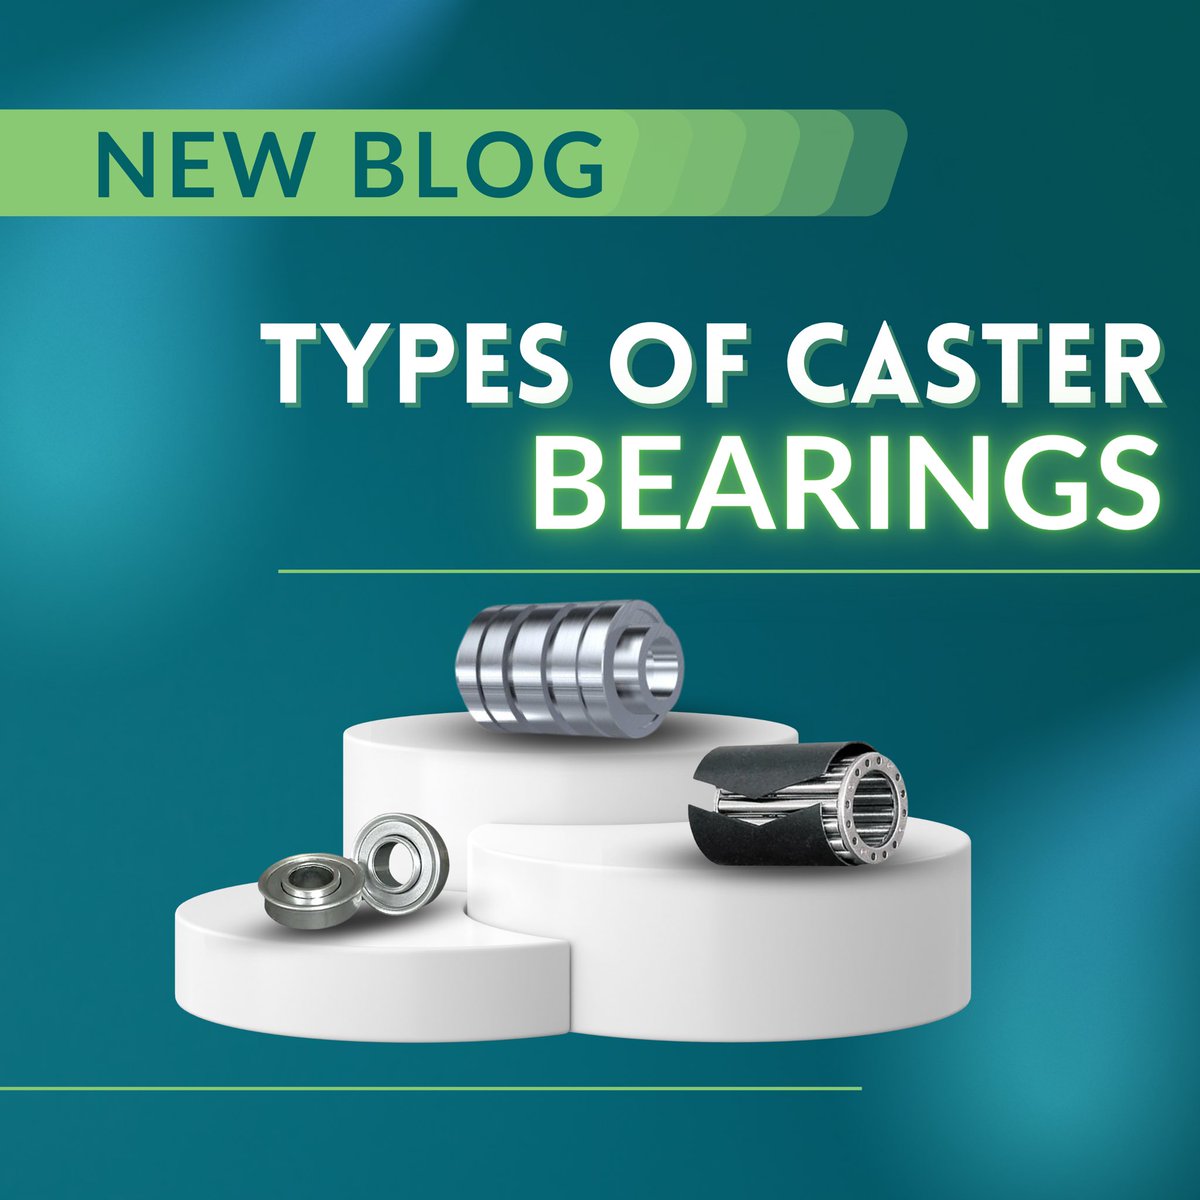 Check out our new blog post and learn how to choose the right caster bearings for your needs: casterhq.com/types-of-caste… #CasterBearings #CasterHQ #CasterSelection #CasterWheels